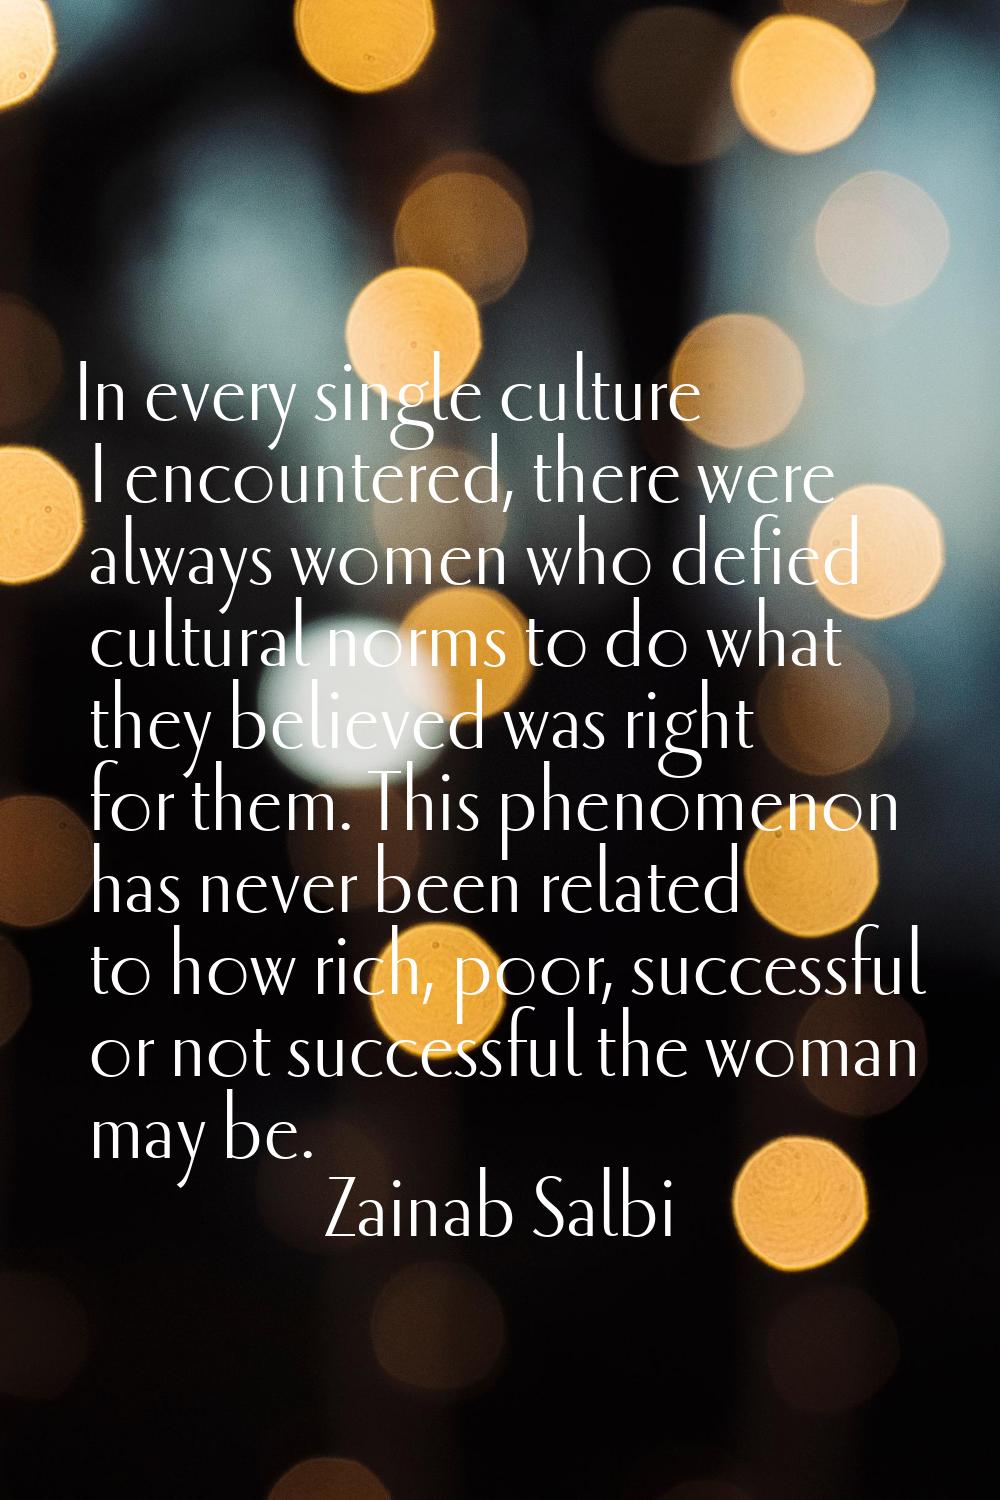 In every single culture I encountered, there were always women who defied cultural norms to do what